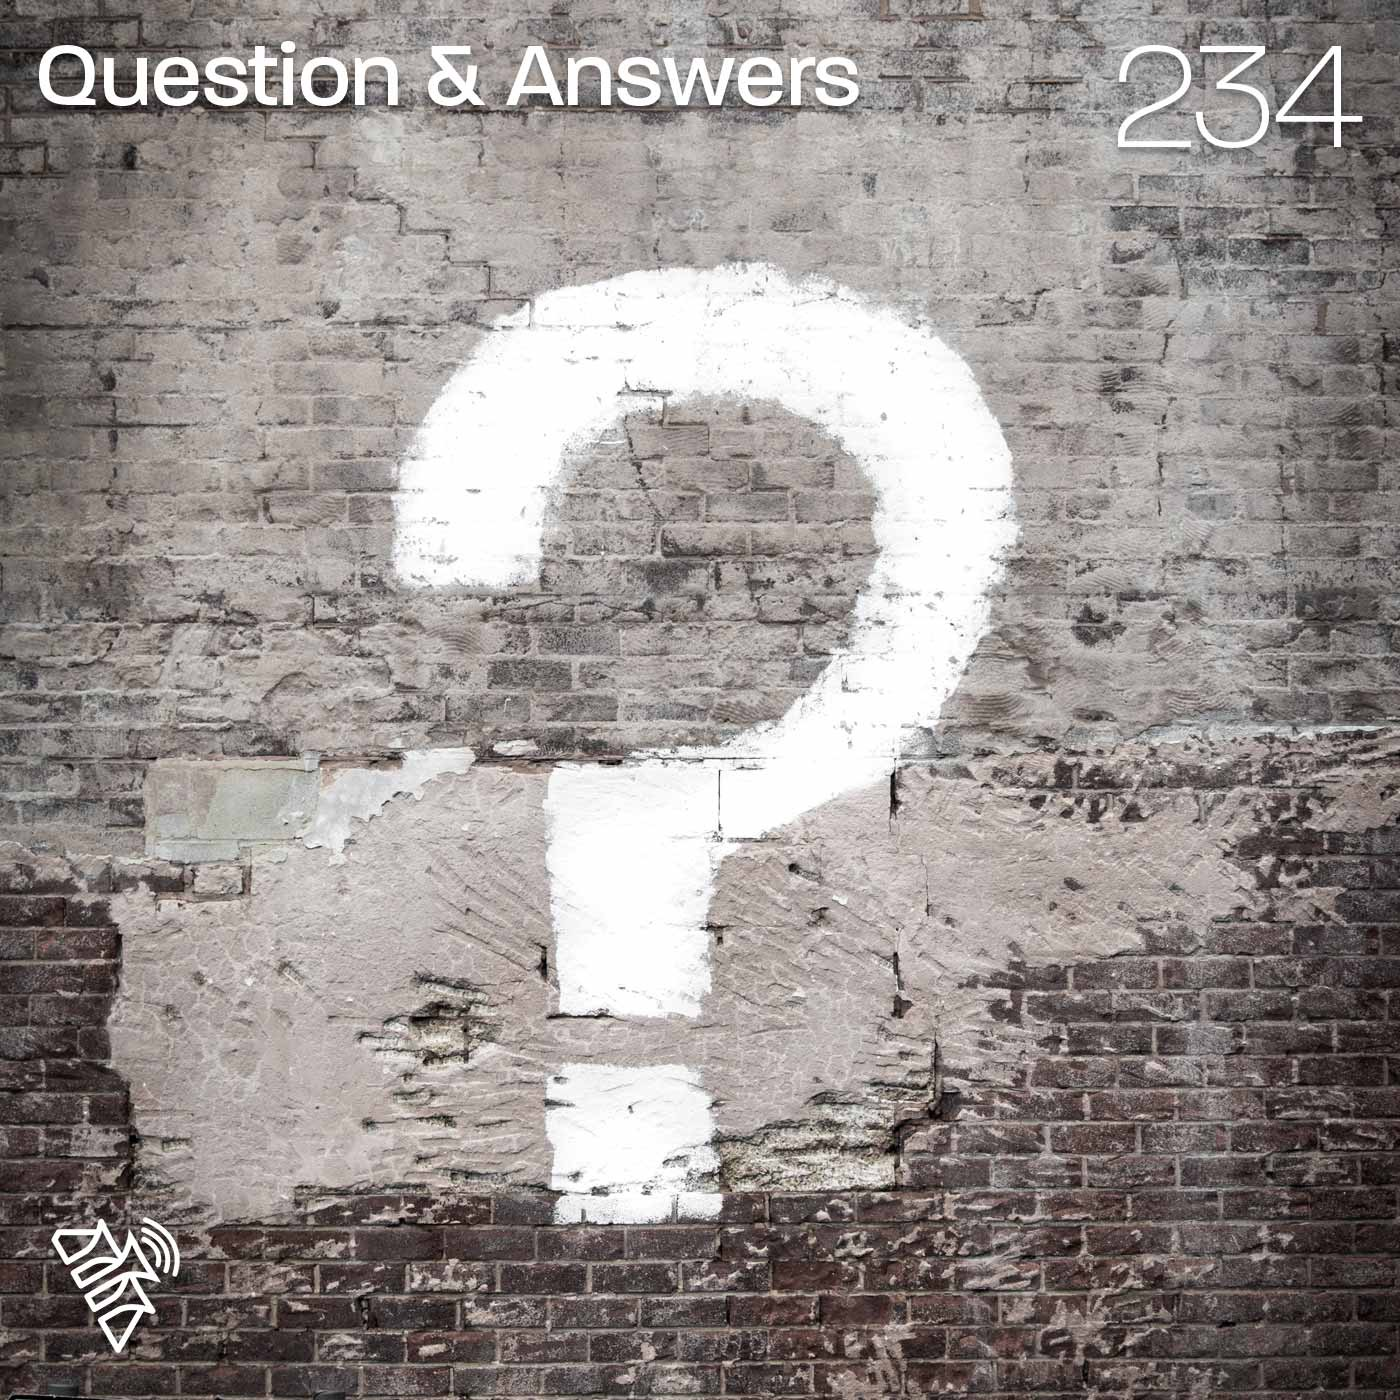 Questions & Answers - Grant Hugo - 234